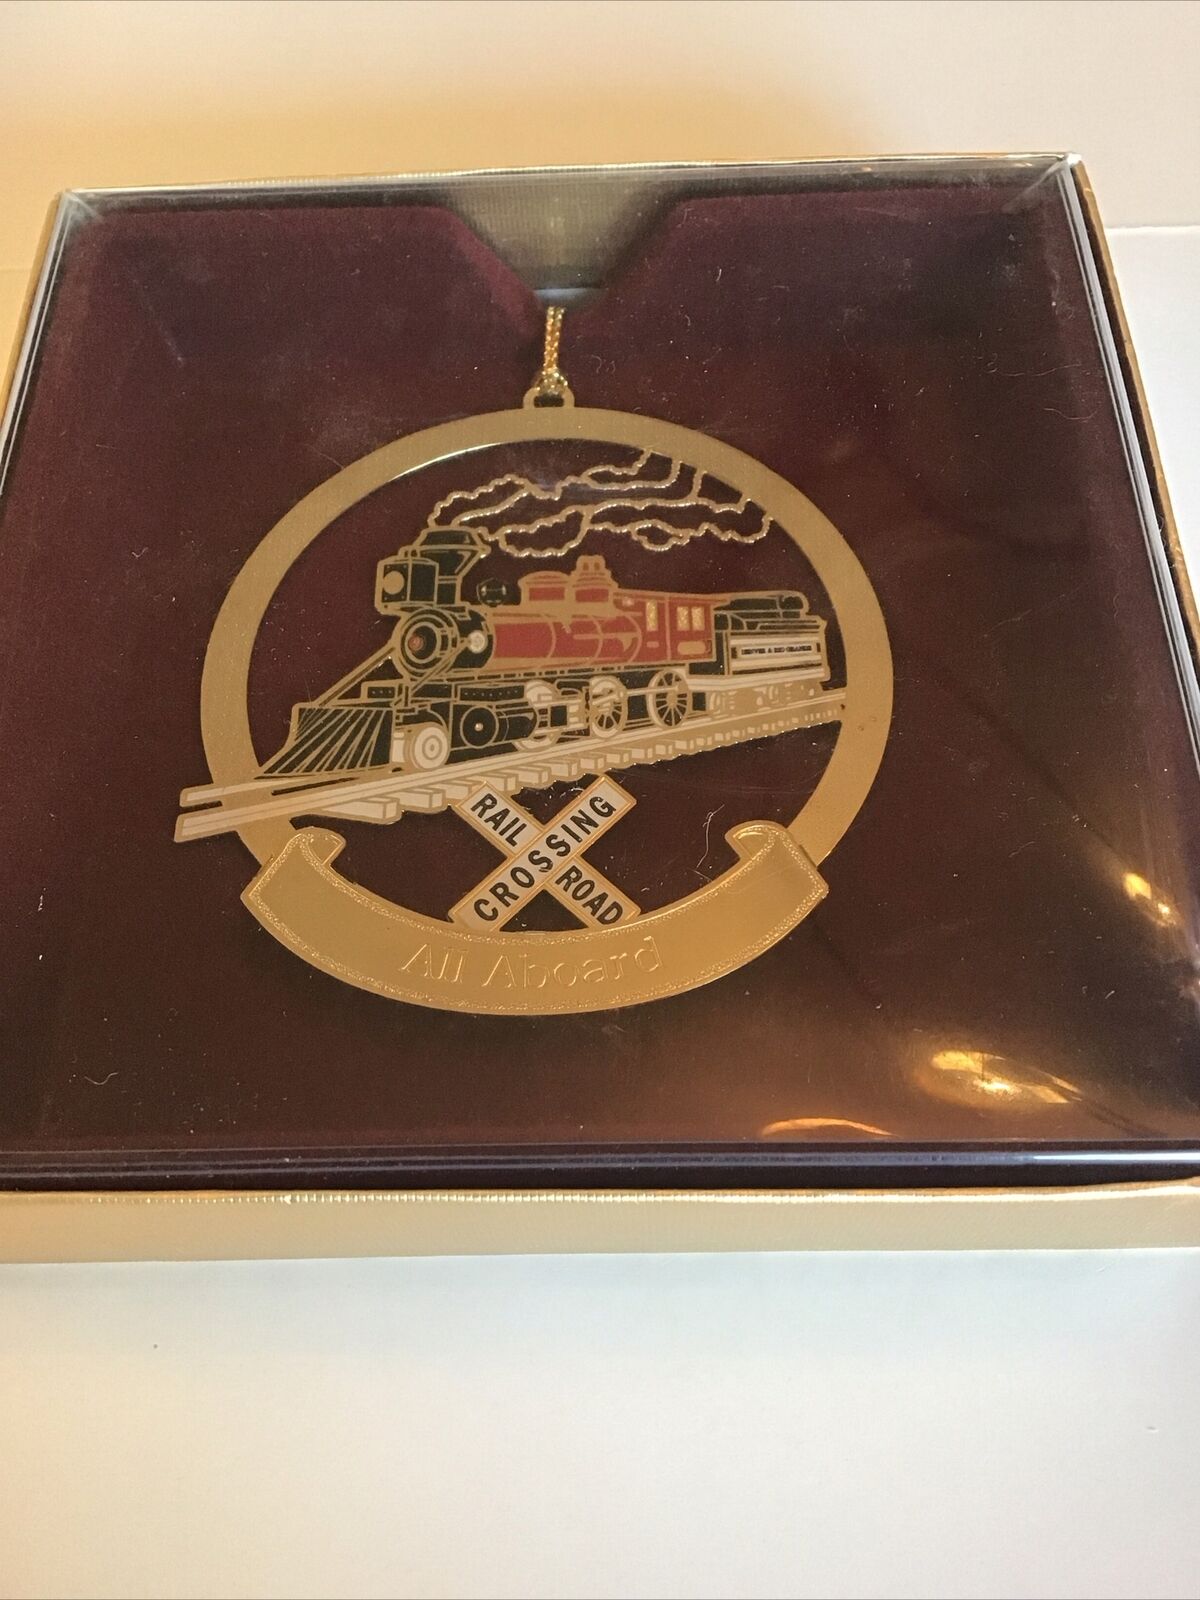 ChemArt Christmas Ornament Scenic Railway 2009 3D Gold Brass “All Aboard” 42633